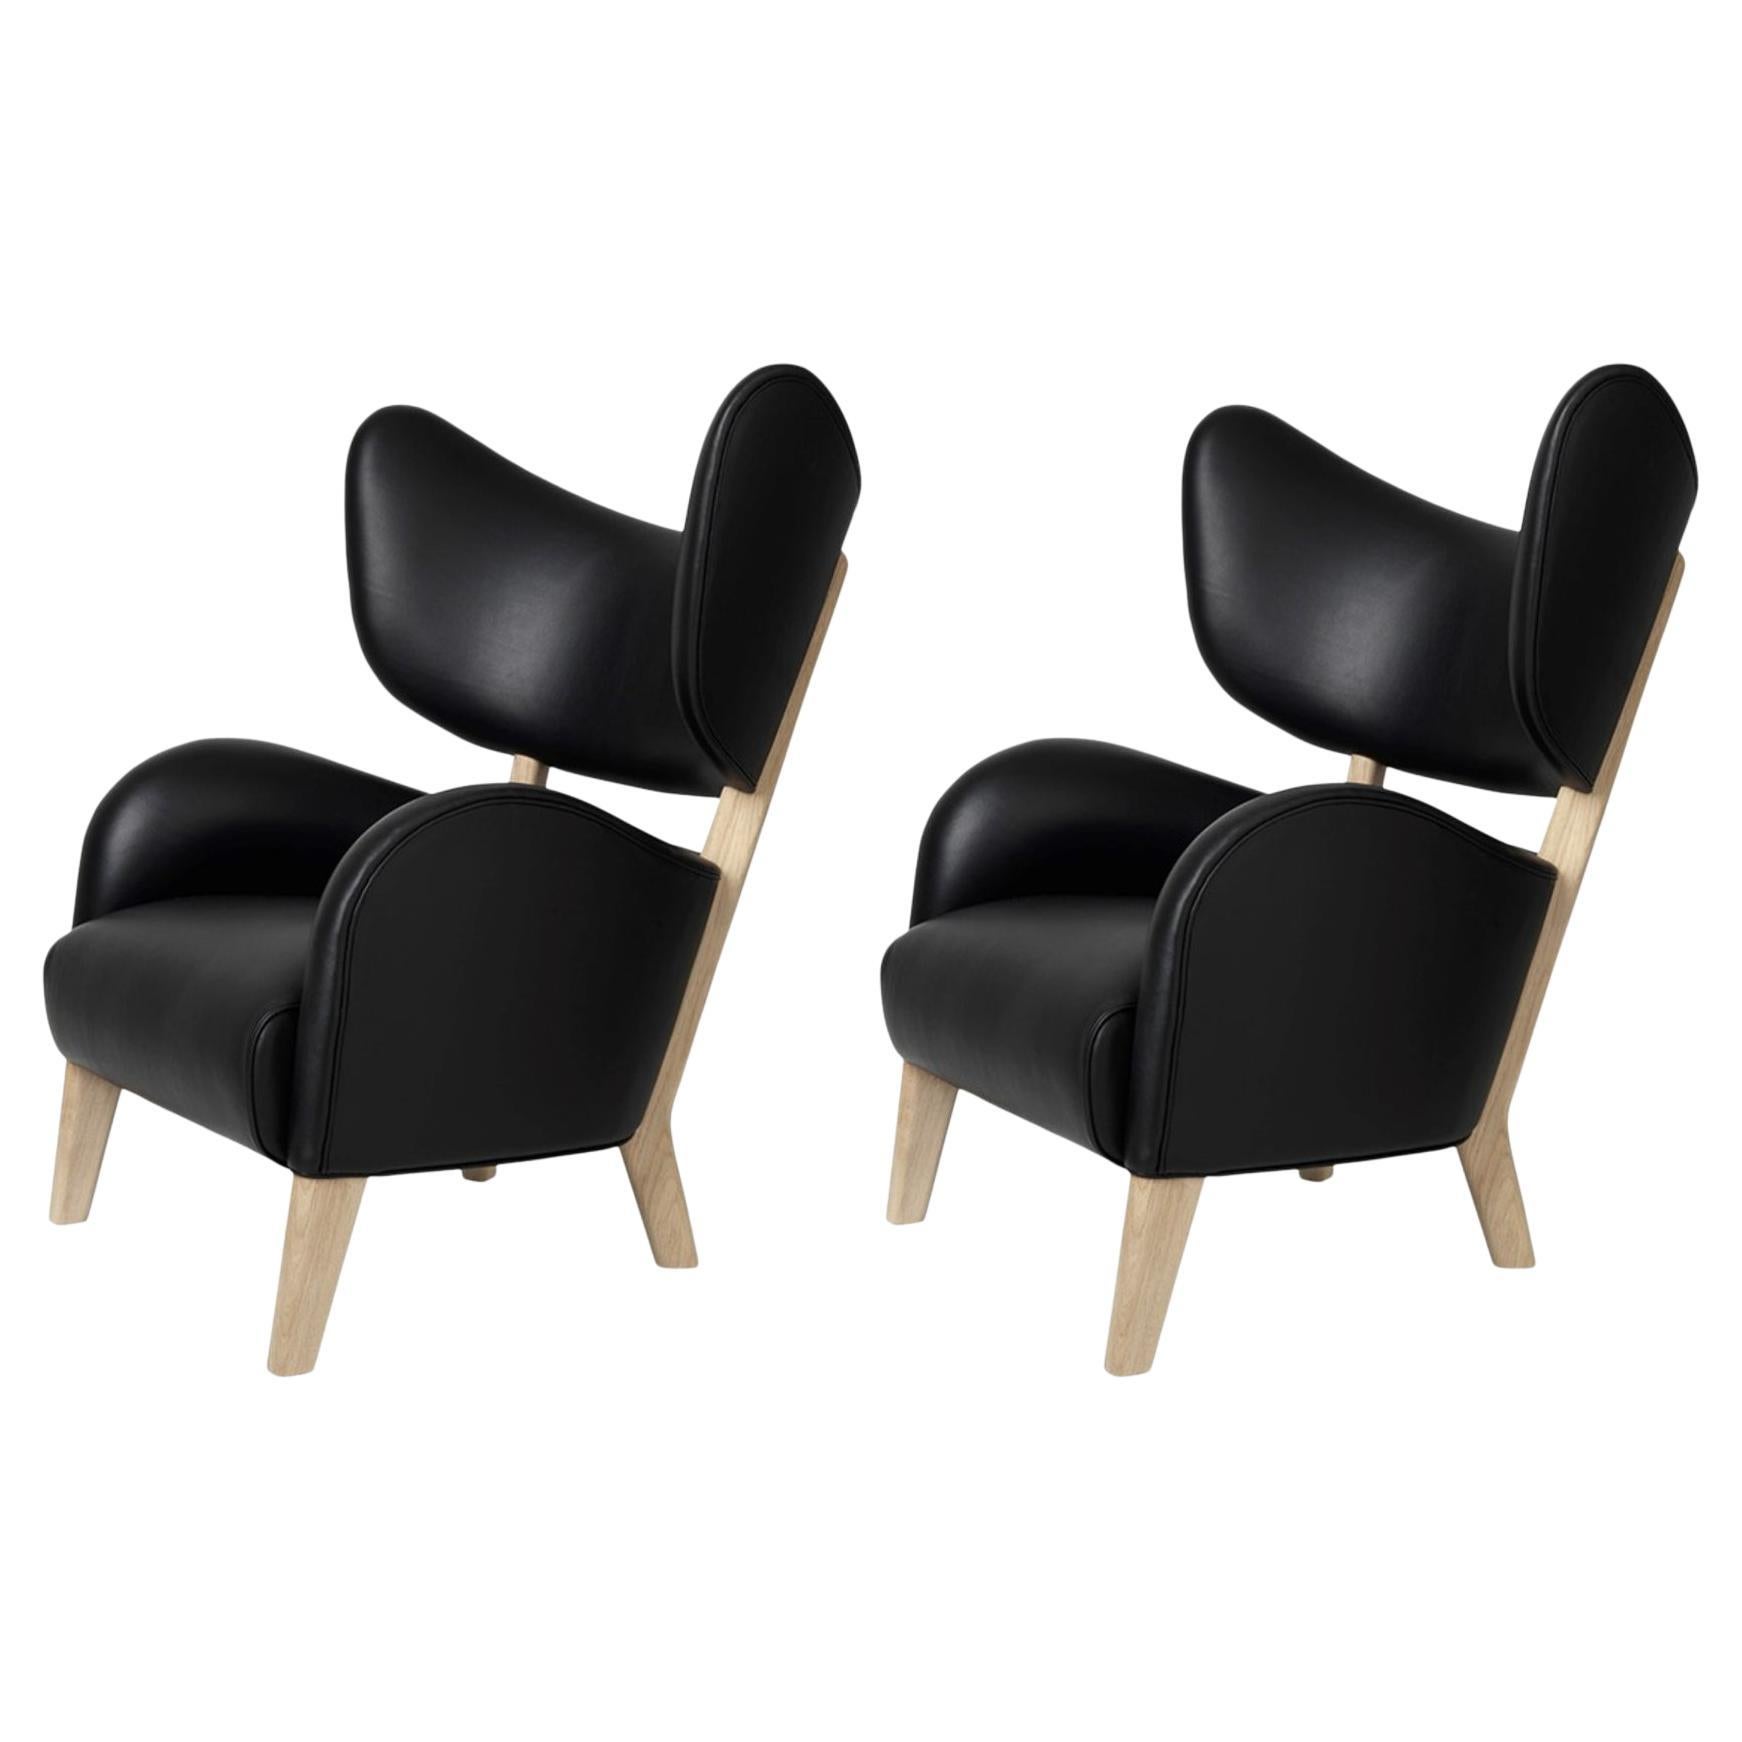 Set of 2 Black Leather Natural Oak My Own Chair Lounge Chairs by Lassen For Sale